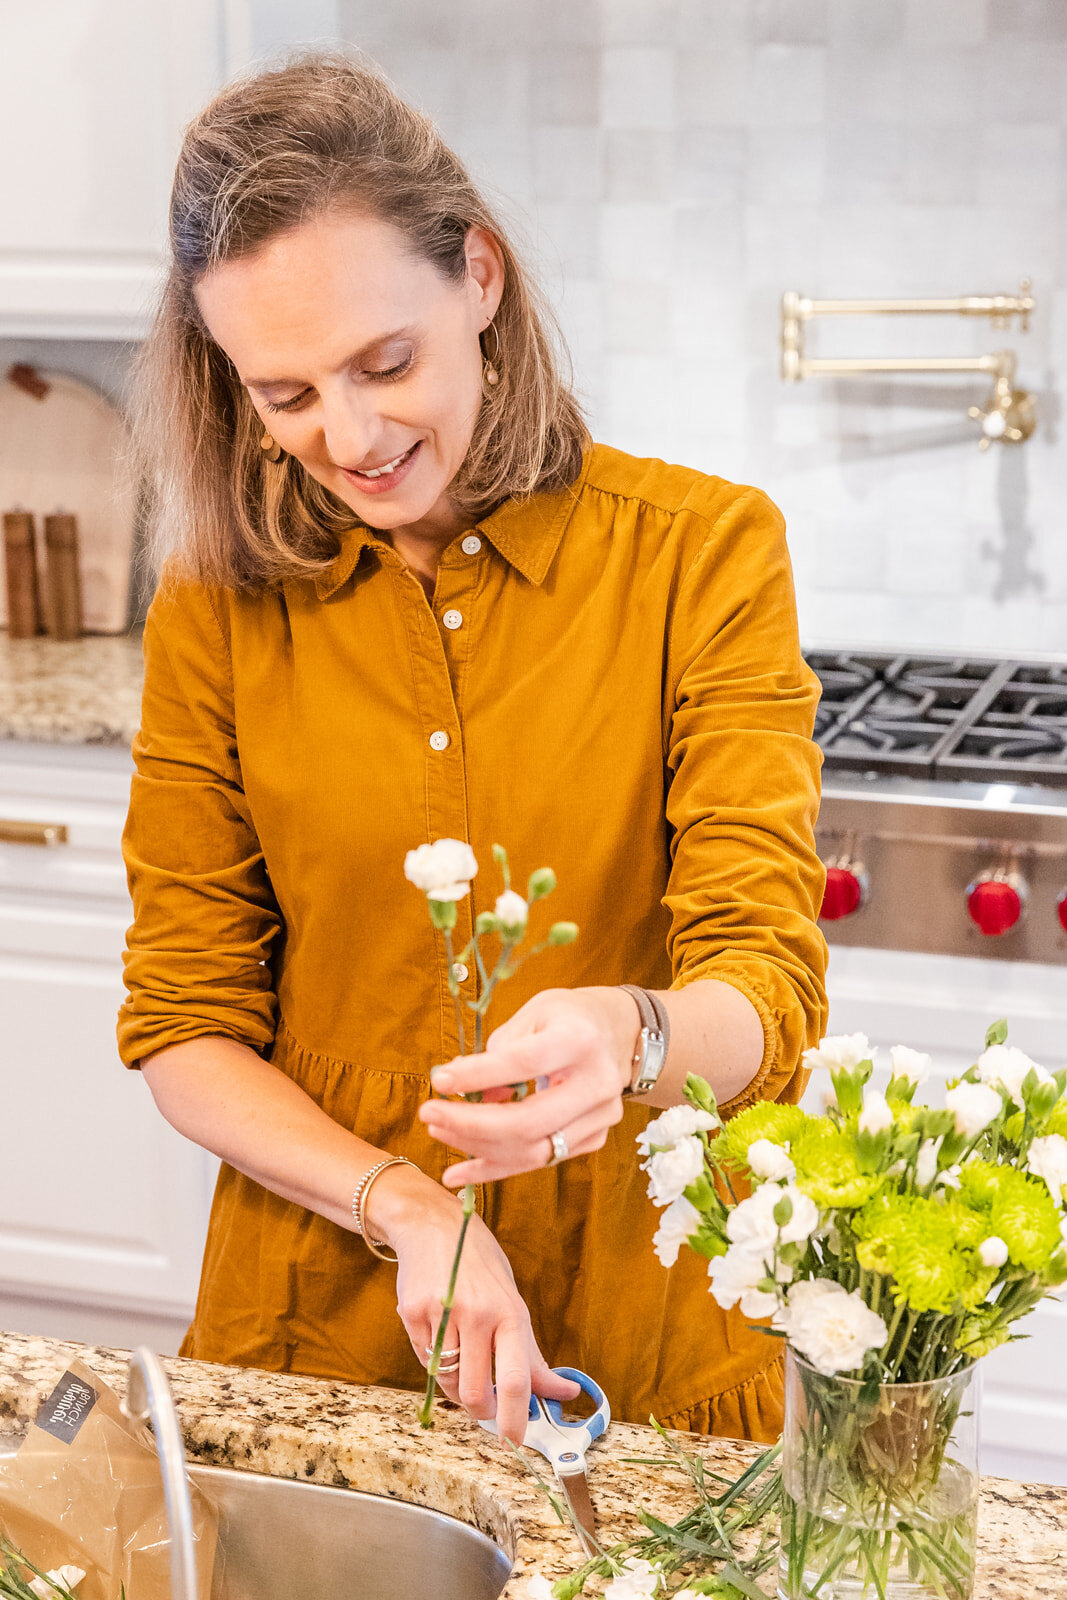 interior designer wearing brown dress  preparing a flower bouquet for a branding photo session in a kitchen Atlanta personal brand photographer | Laure Photography branding